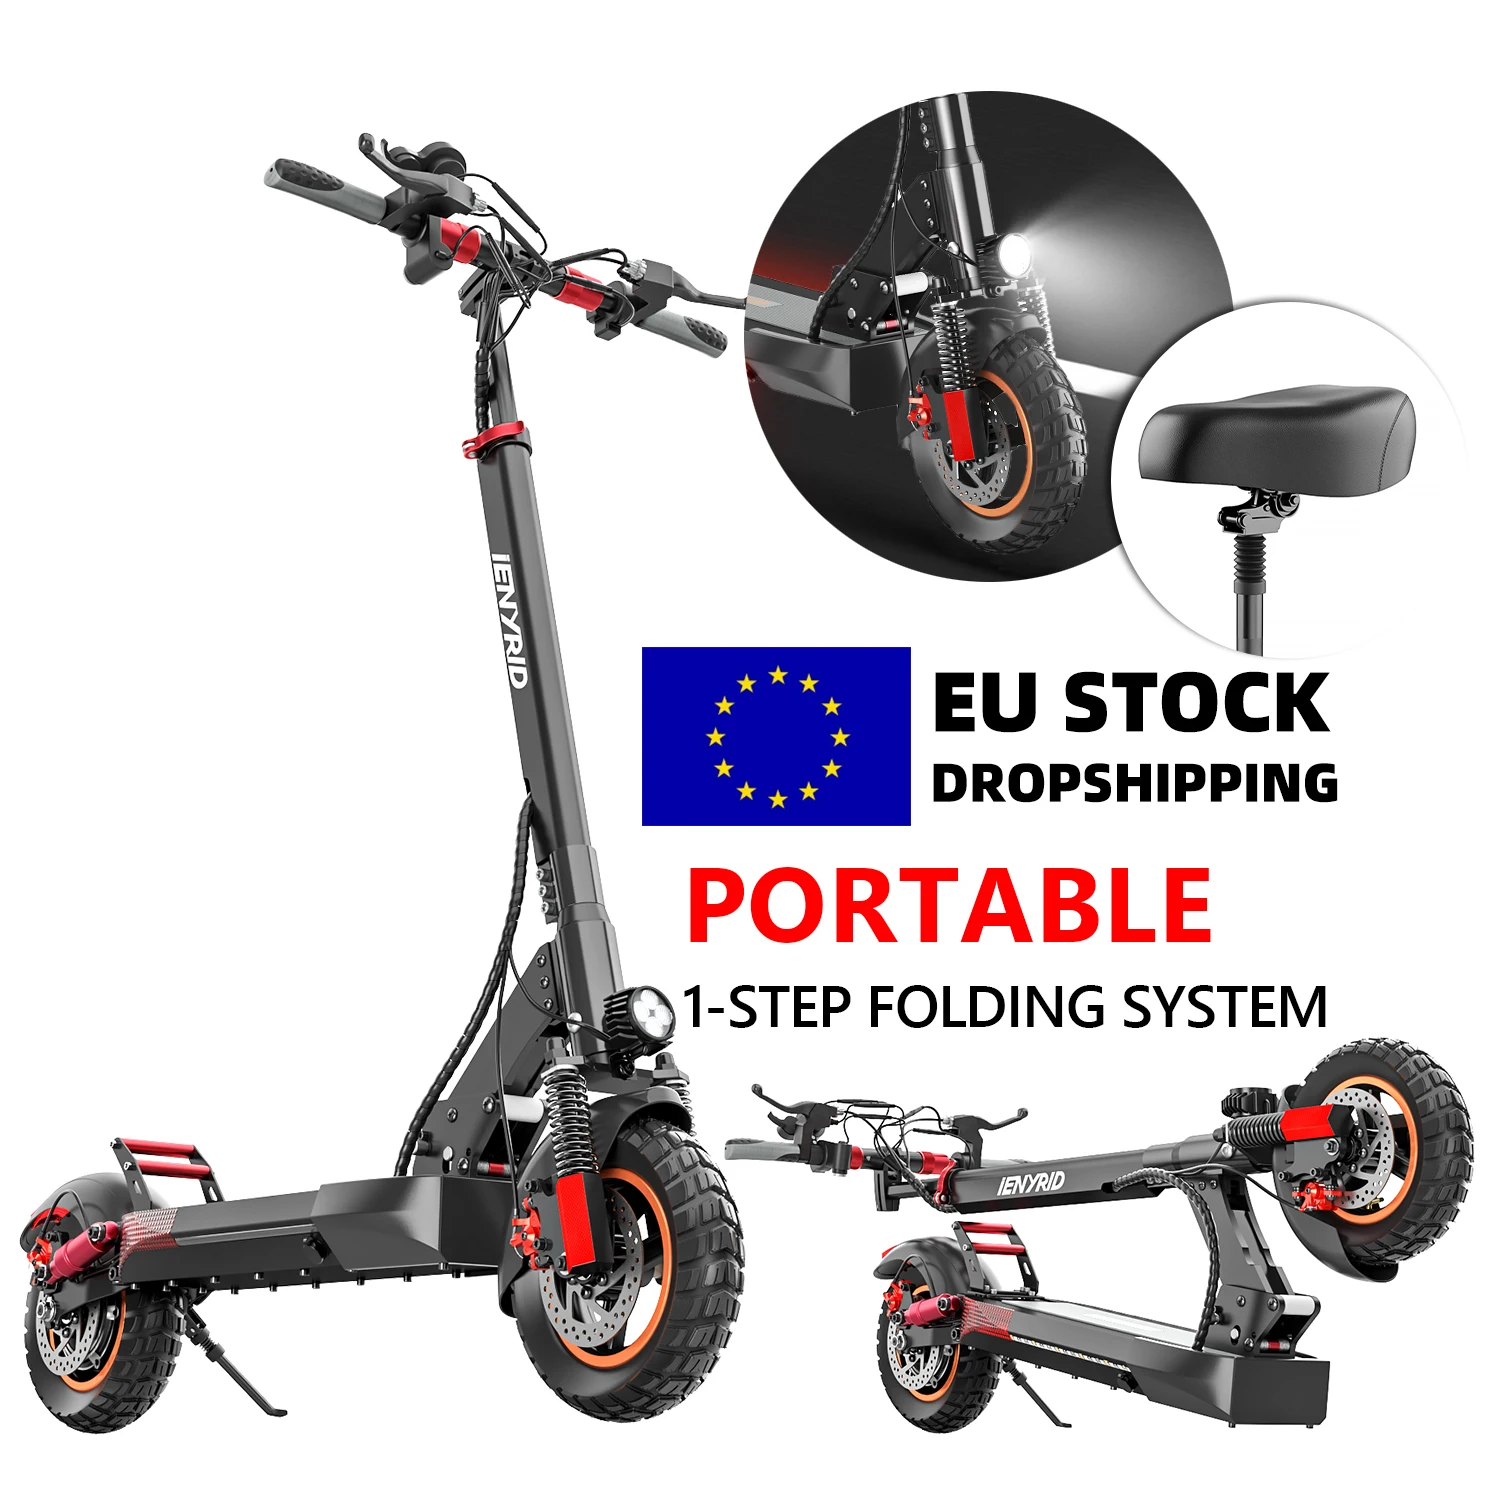 iENYRID M4 electric scooter eu warehouse 500W 600W brushless motor 48V 10AH 16Ah 3 Speed Modes iE kugoo M4 PRO electric scooter